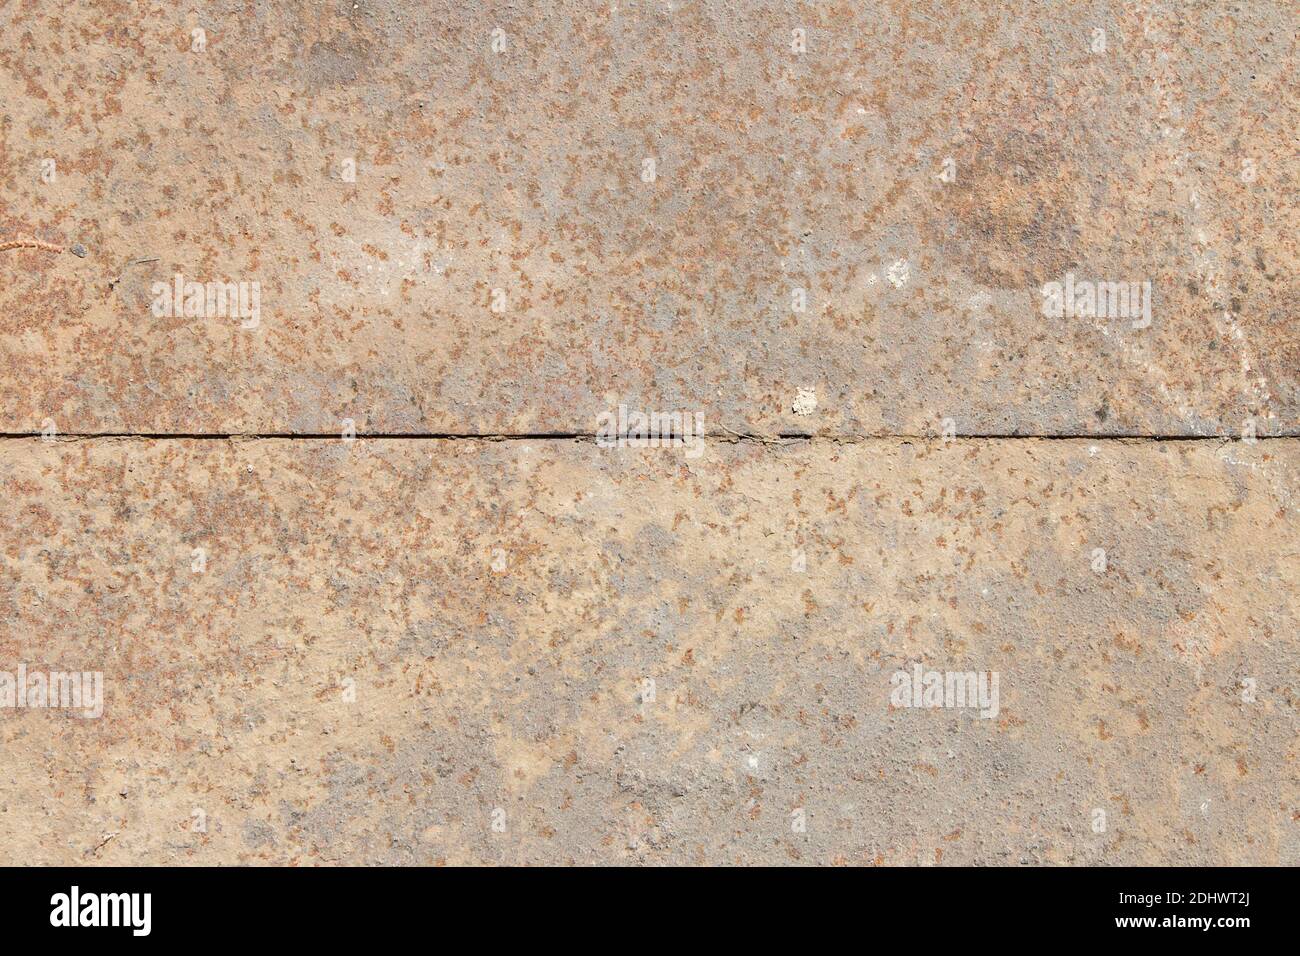 A metal sheet covered in rust and sand is divided into two by a straight line. Abstract texture background. Stock Photo